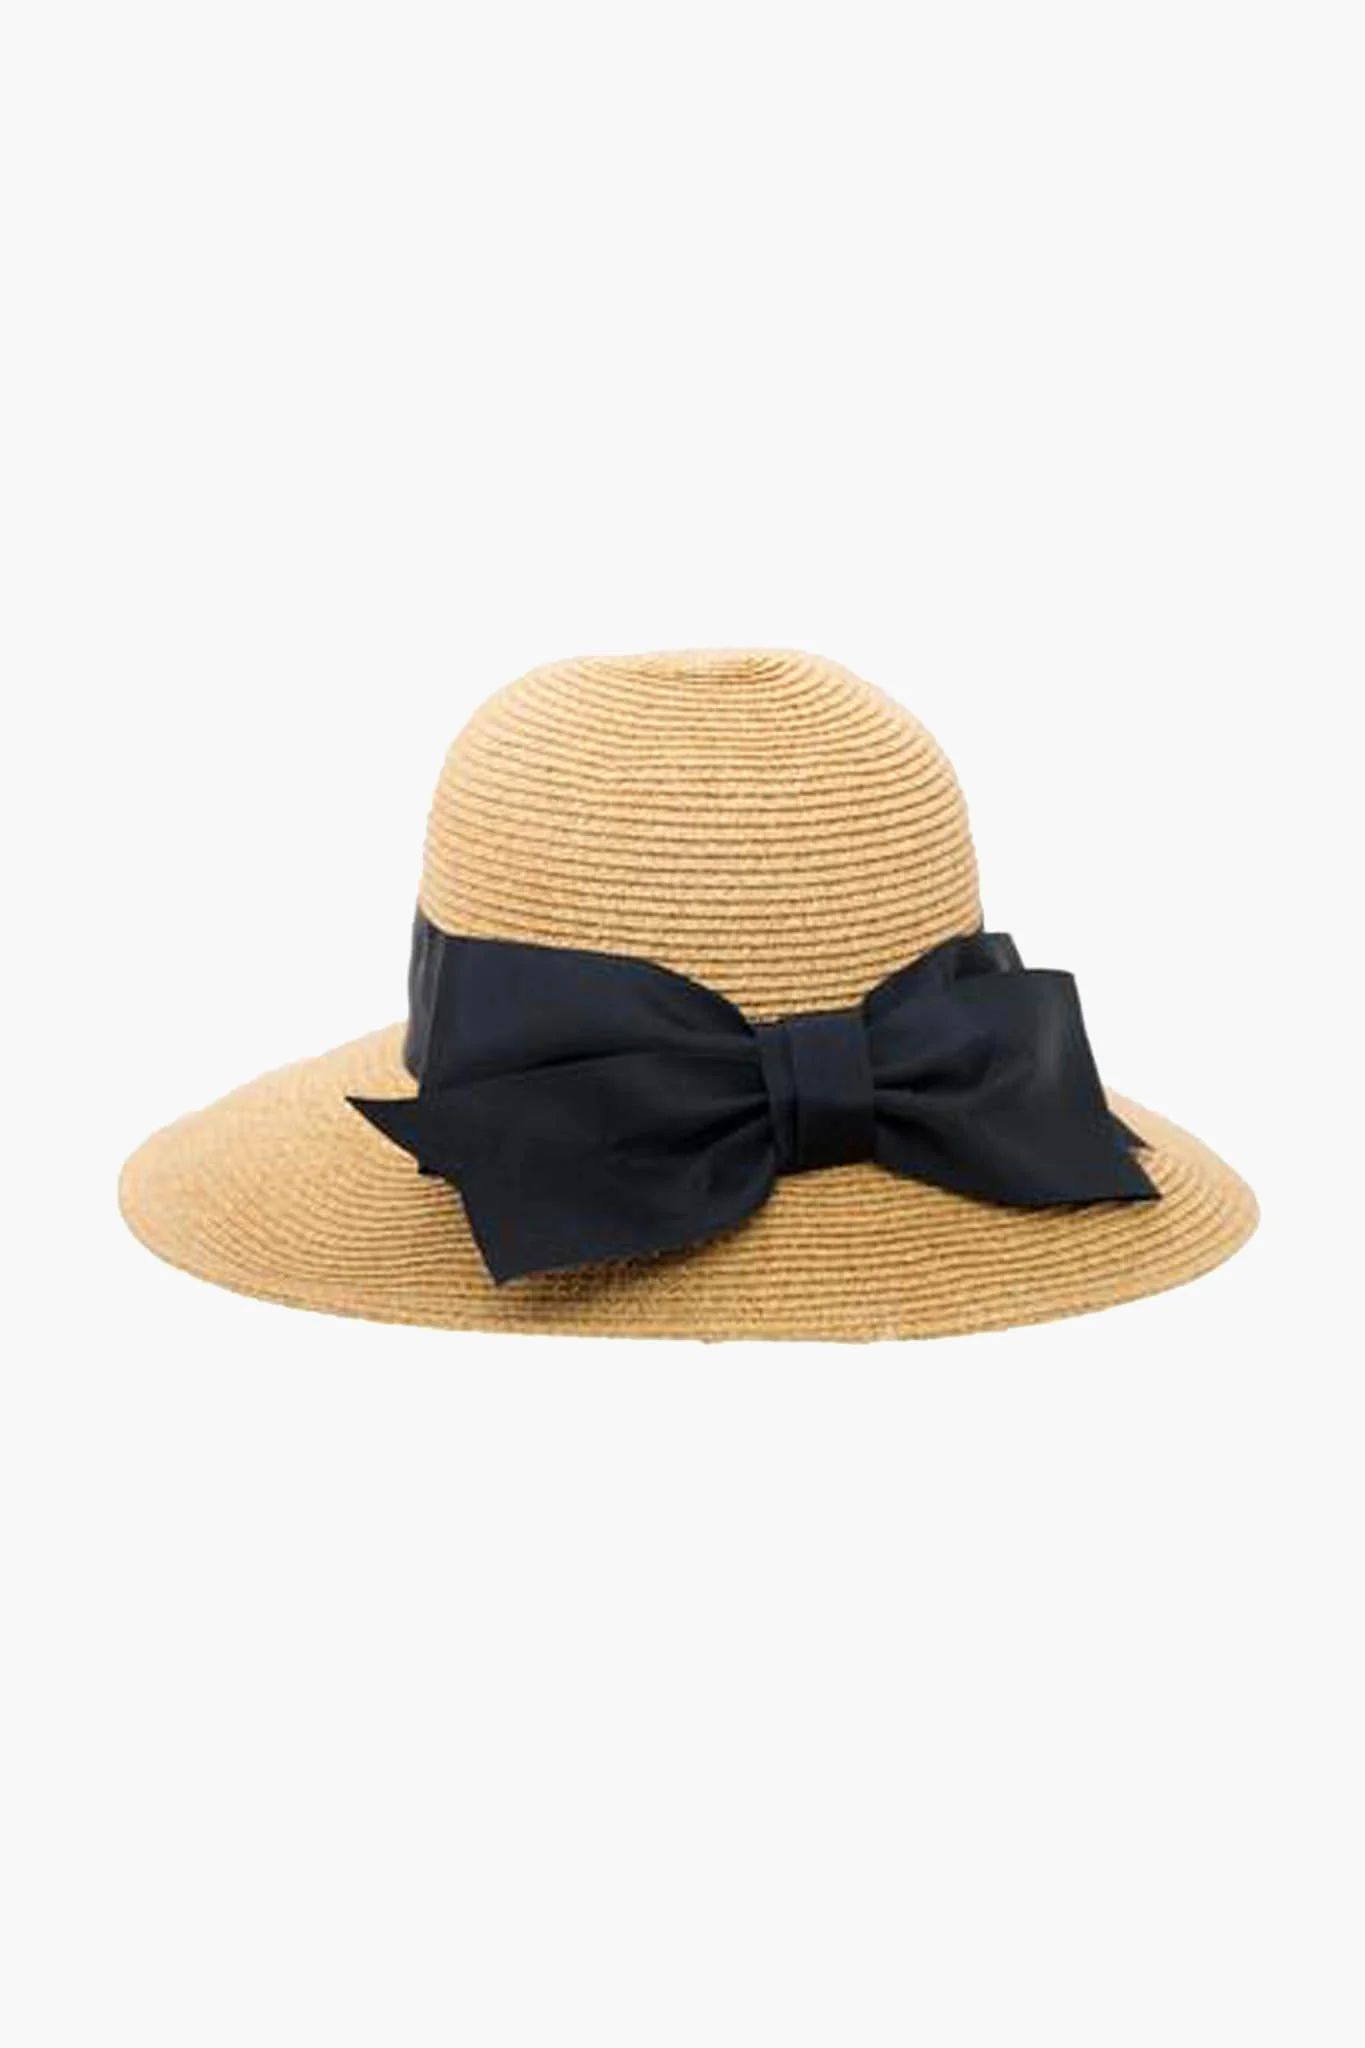 Exclusive Black Packable Wide Bow Sunhat | Tuckernuck (US)